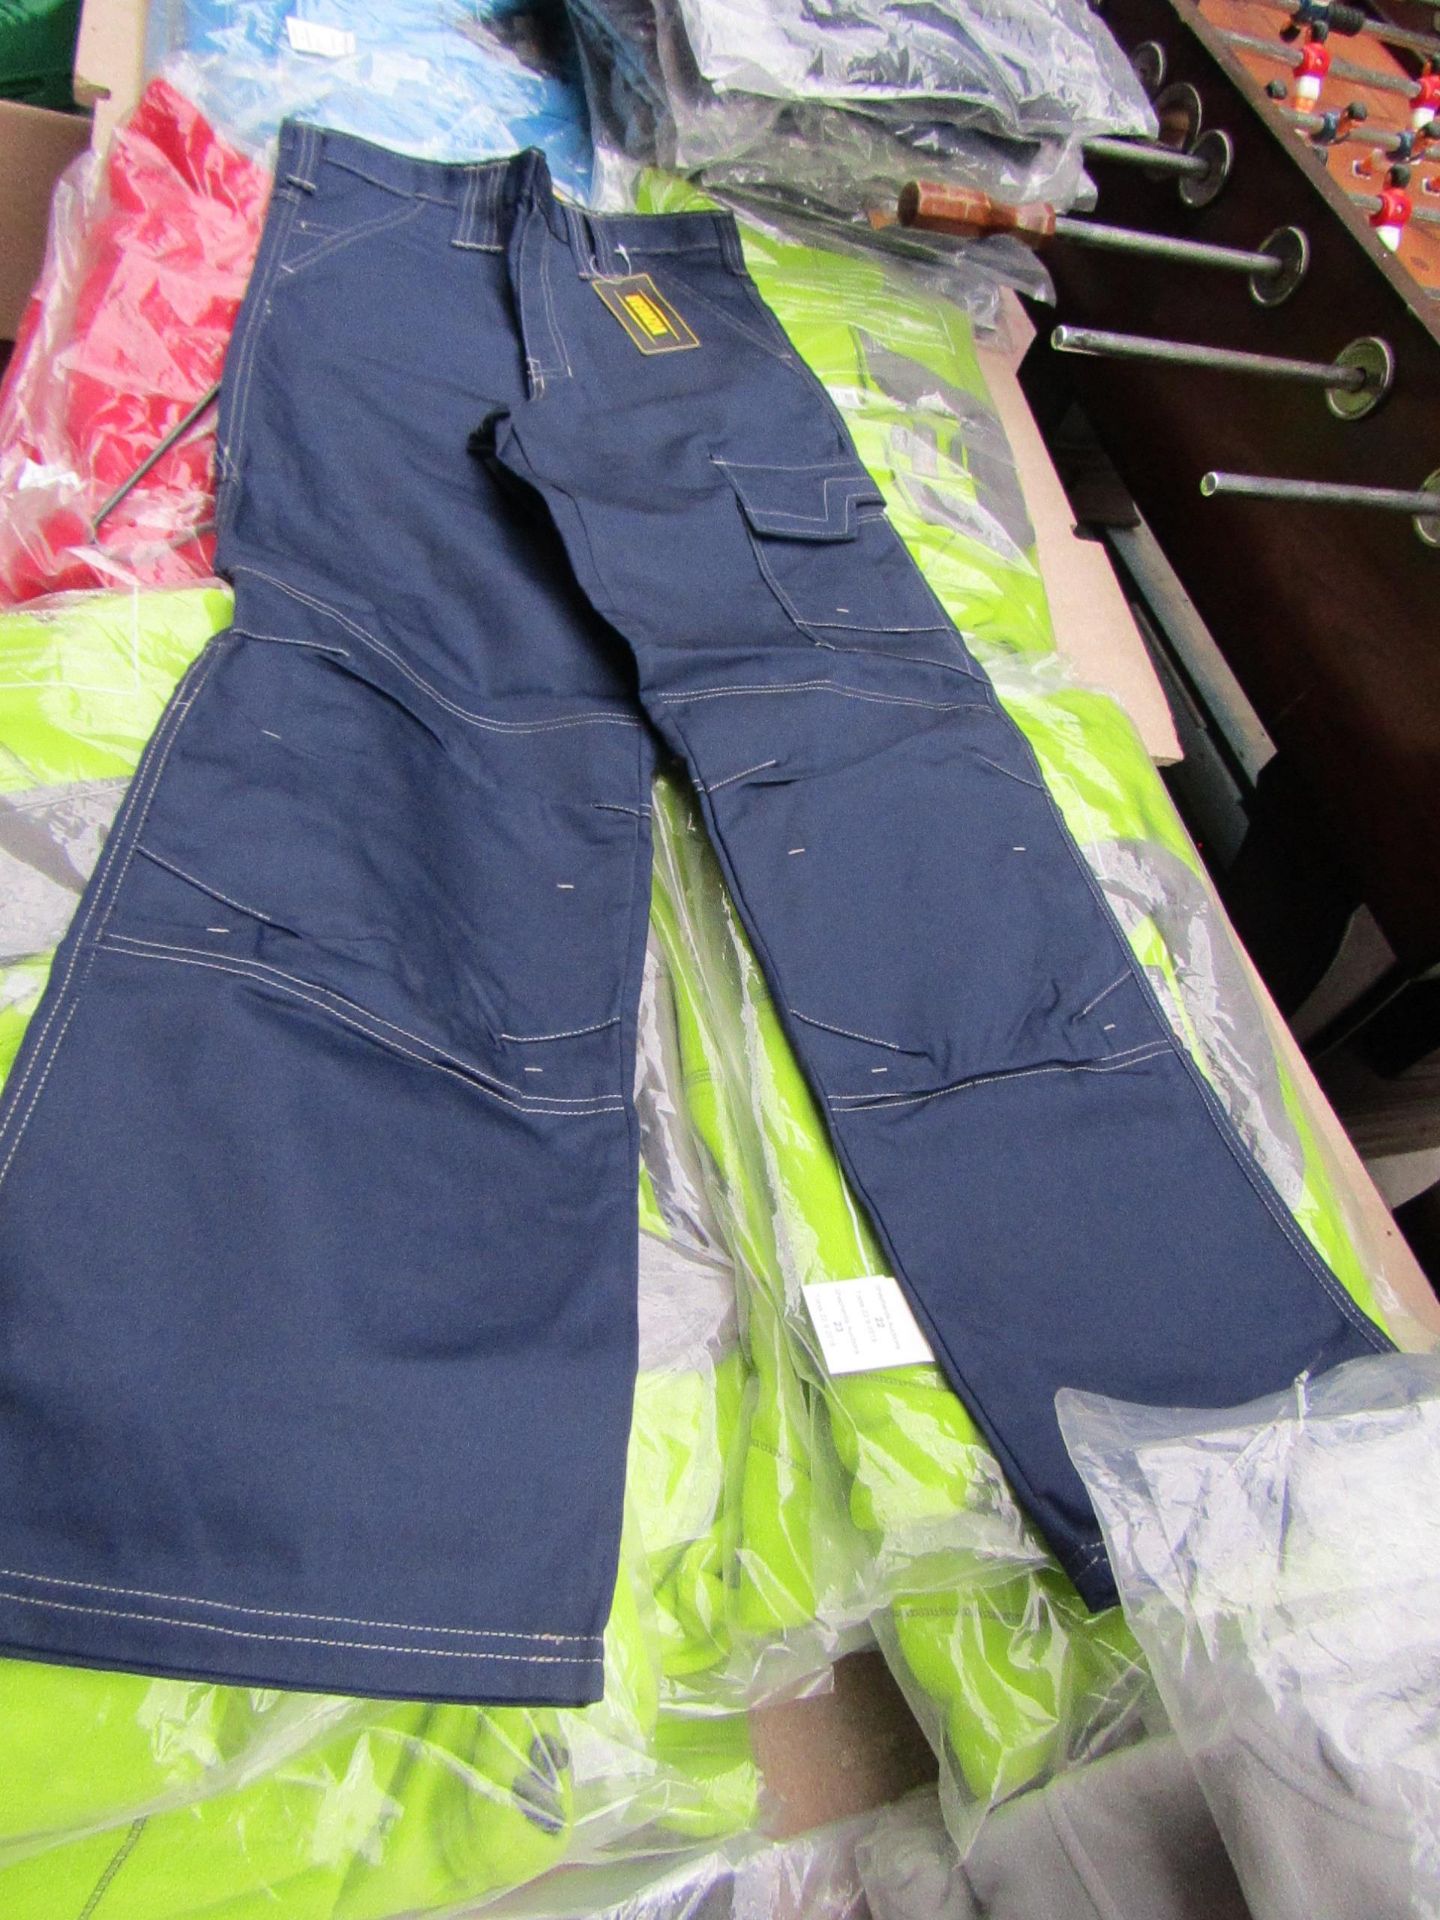 Vizwear action line trousers, size 42R, new and packaged.